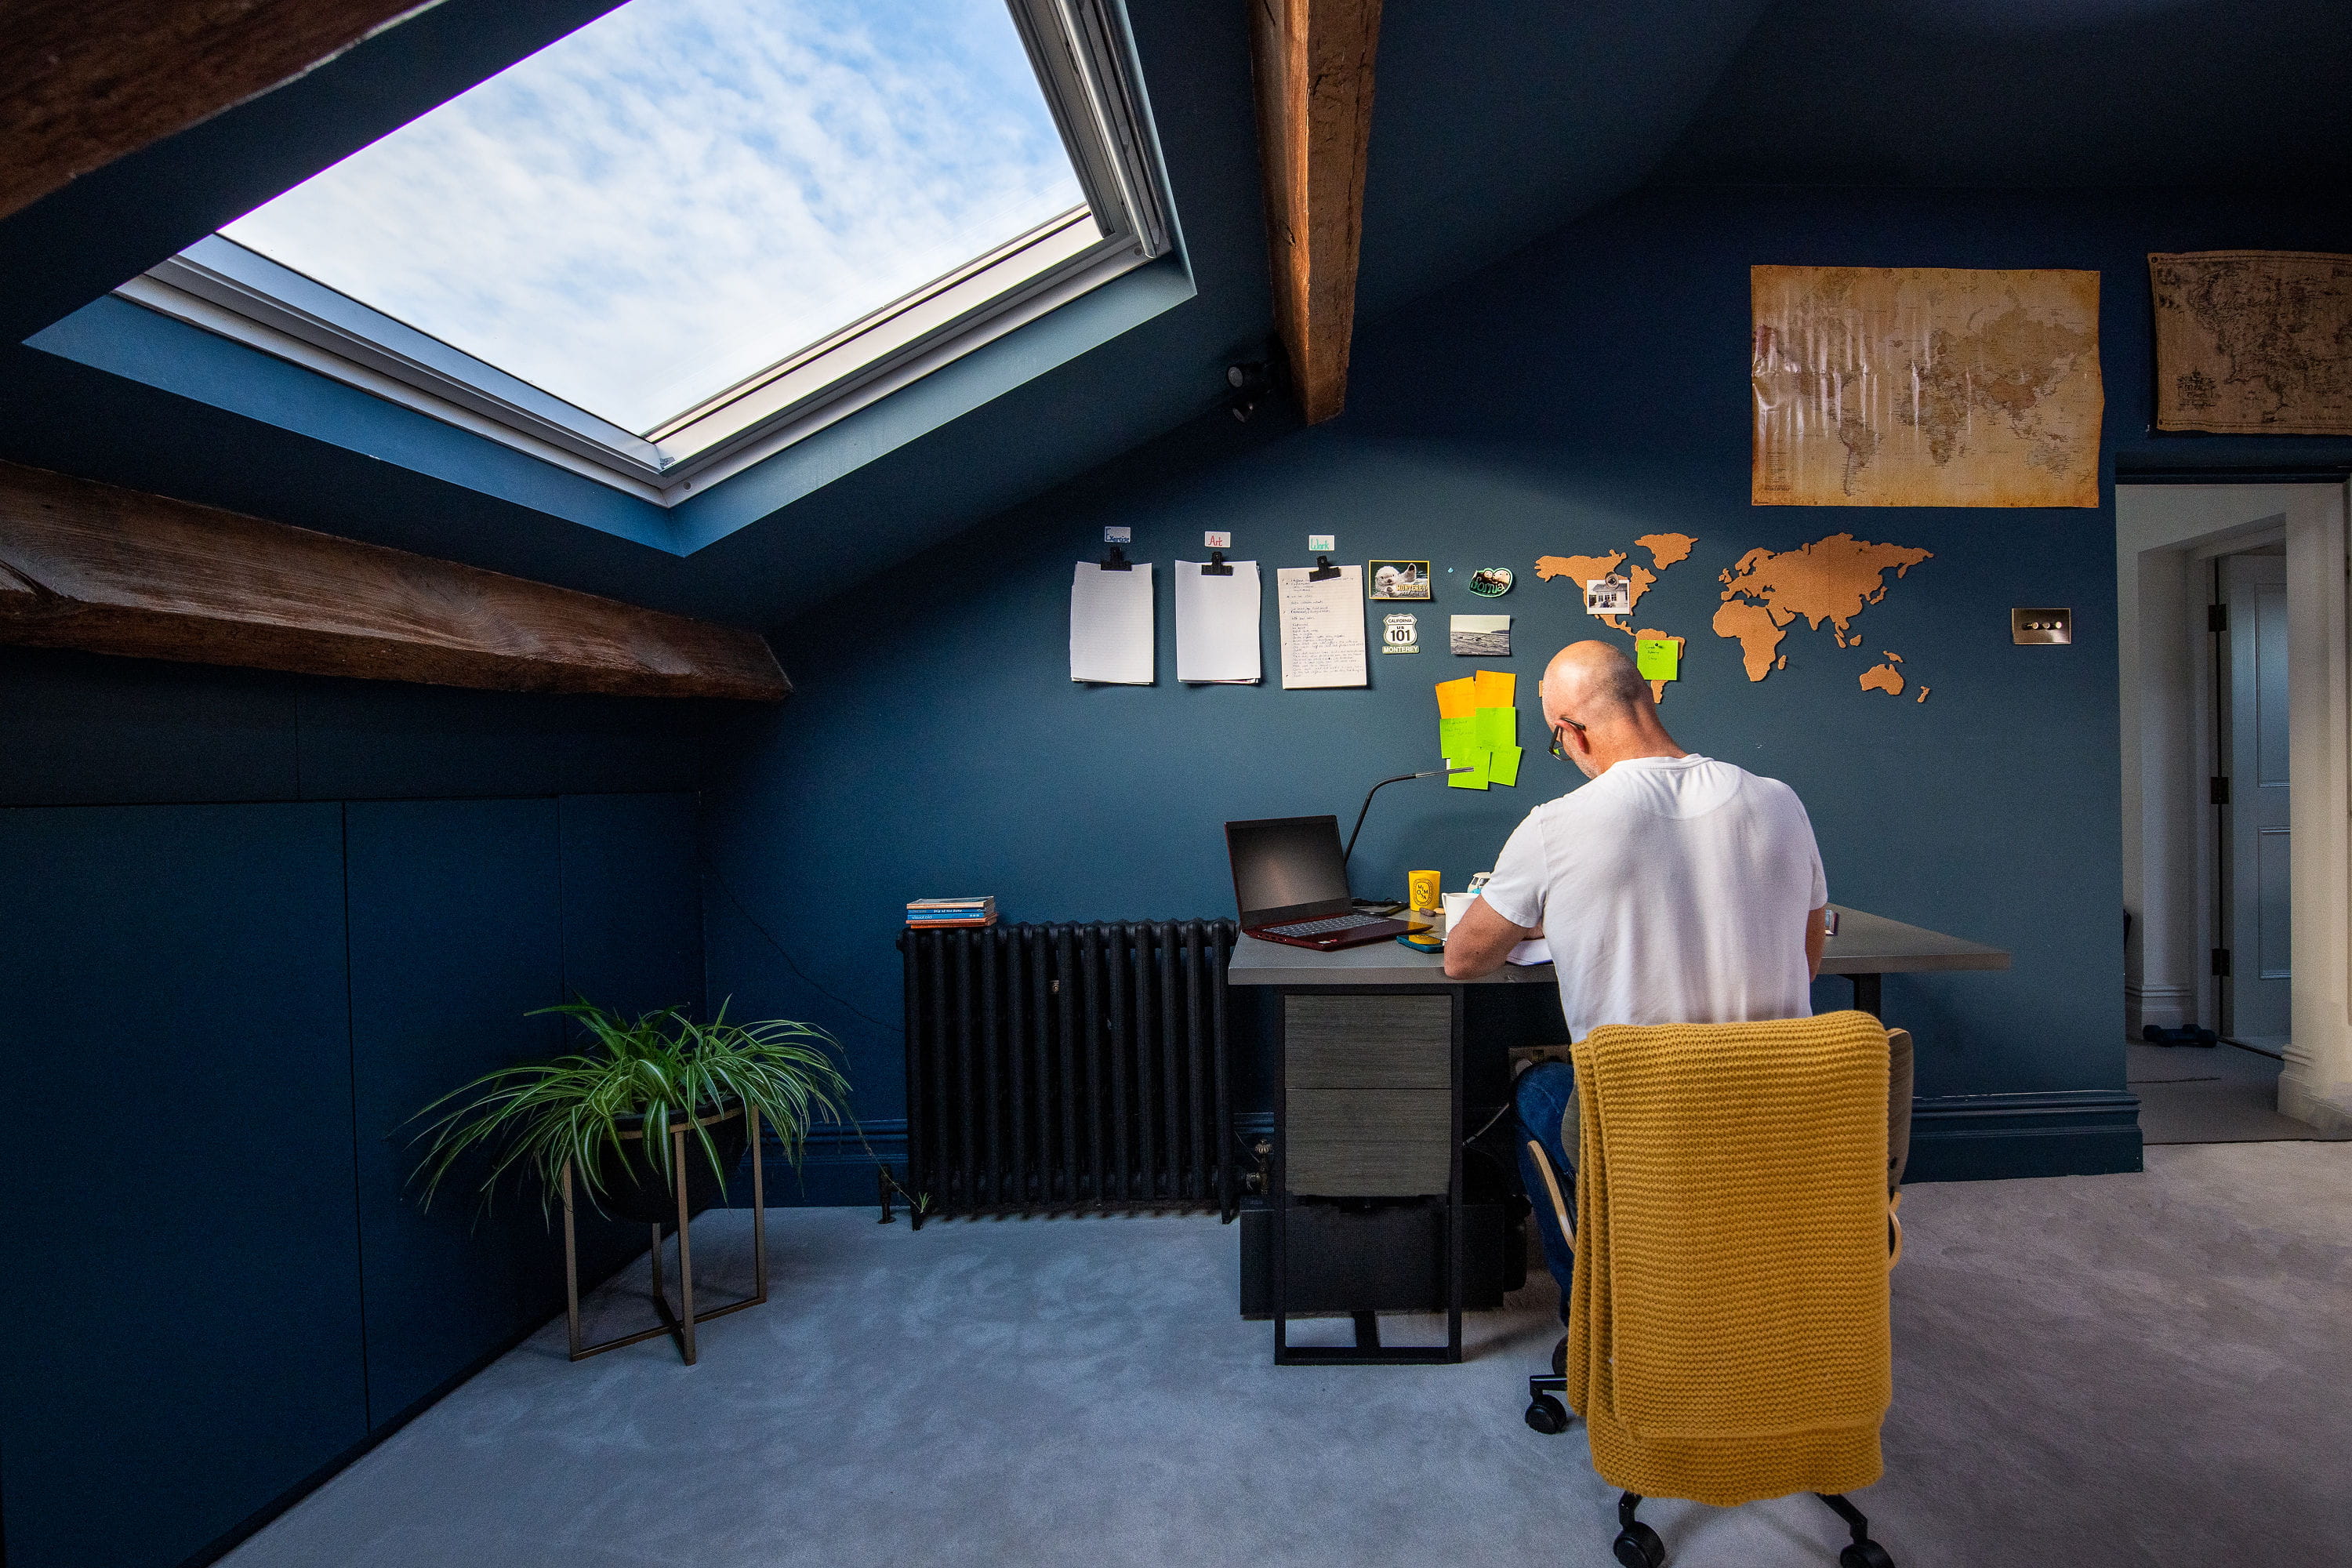 Home office with VELUX roof window, world map on wall, and man working at desk.